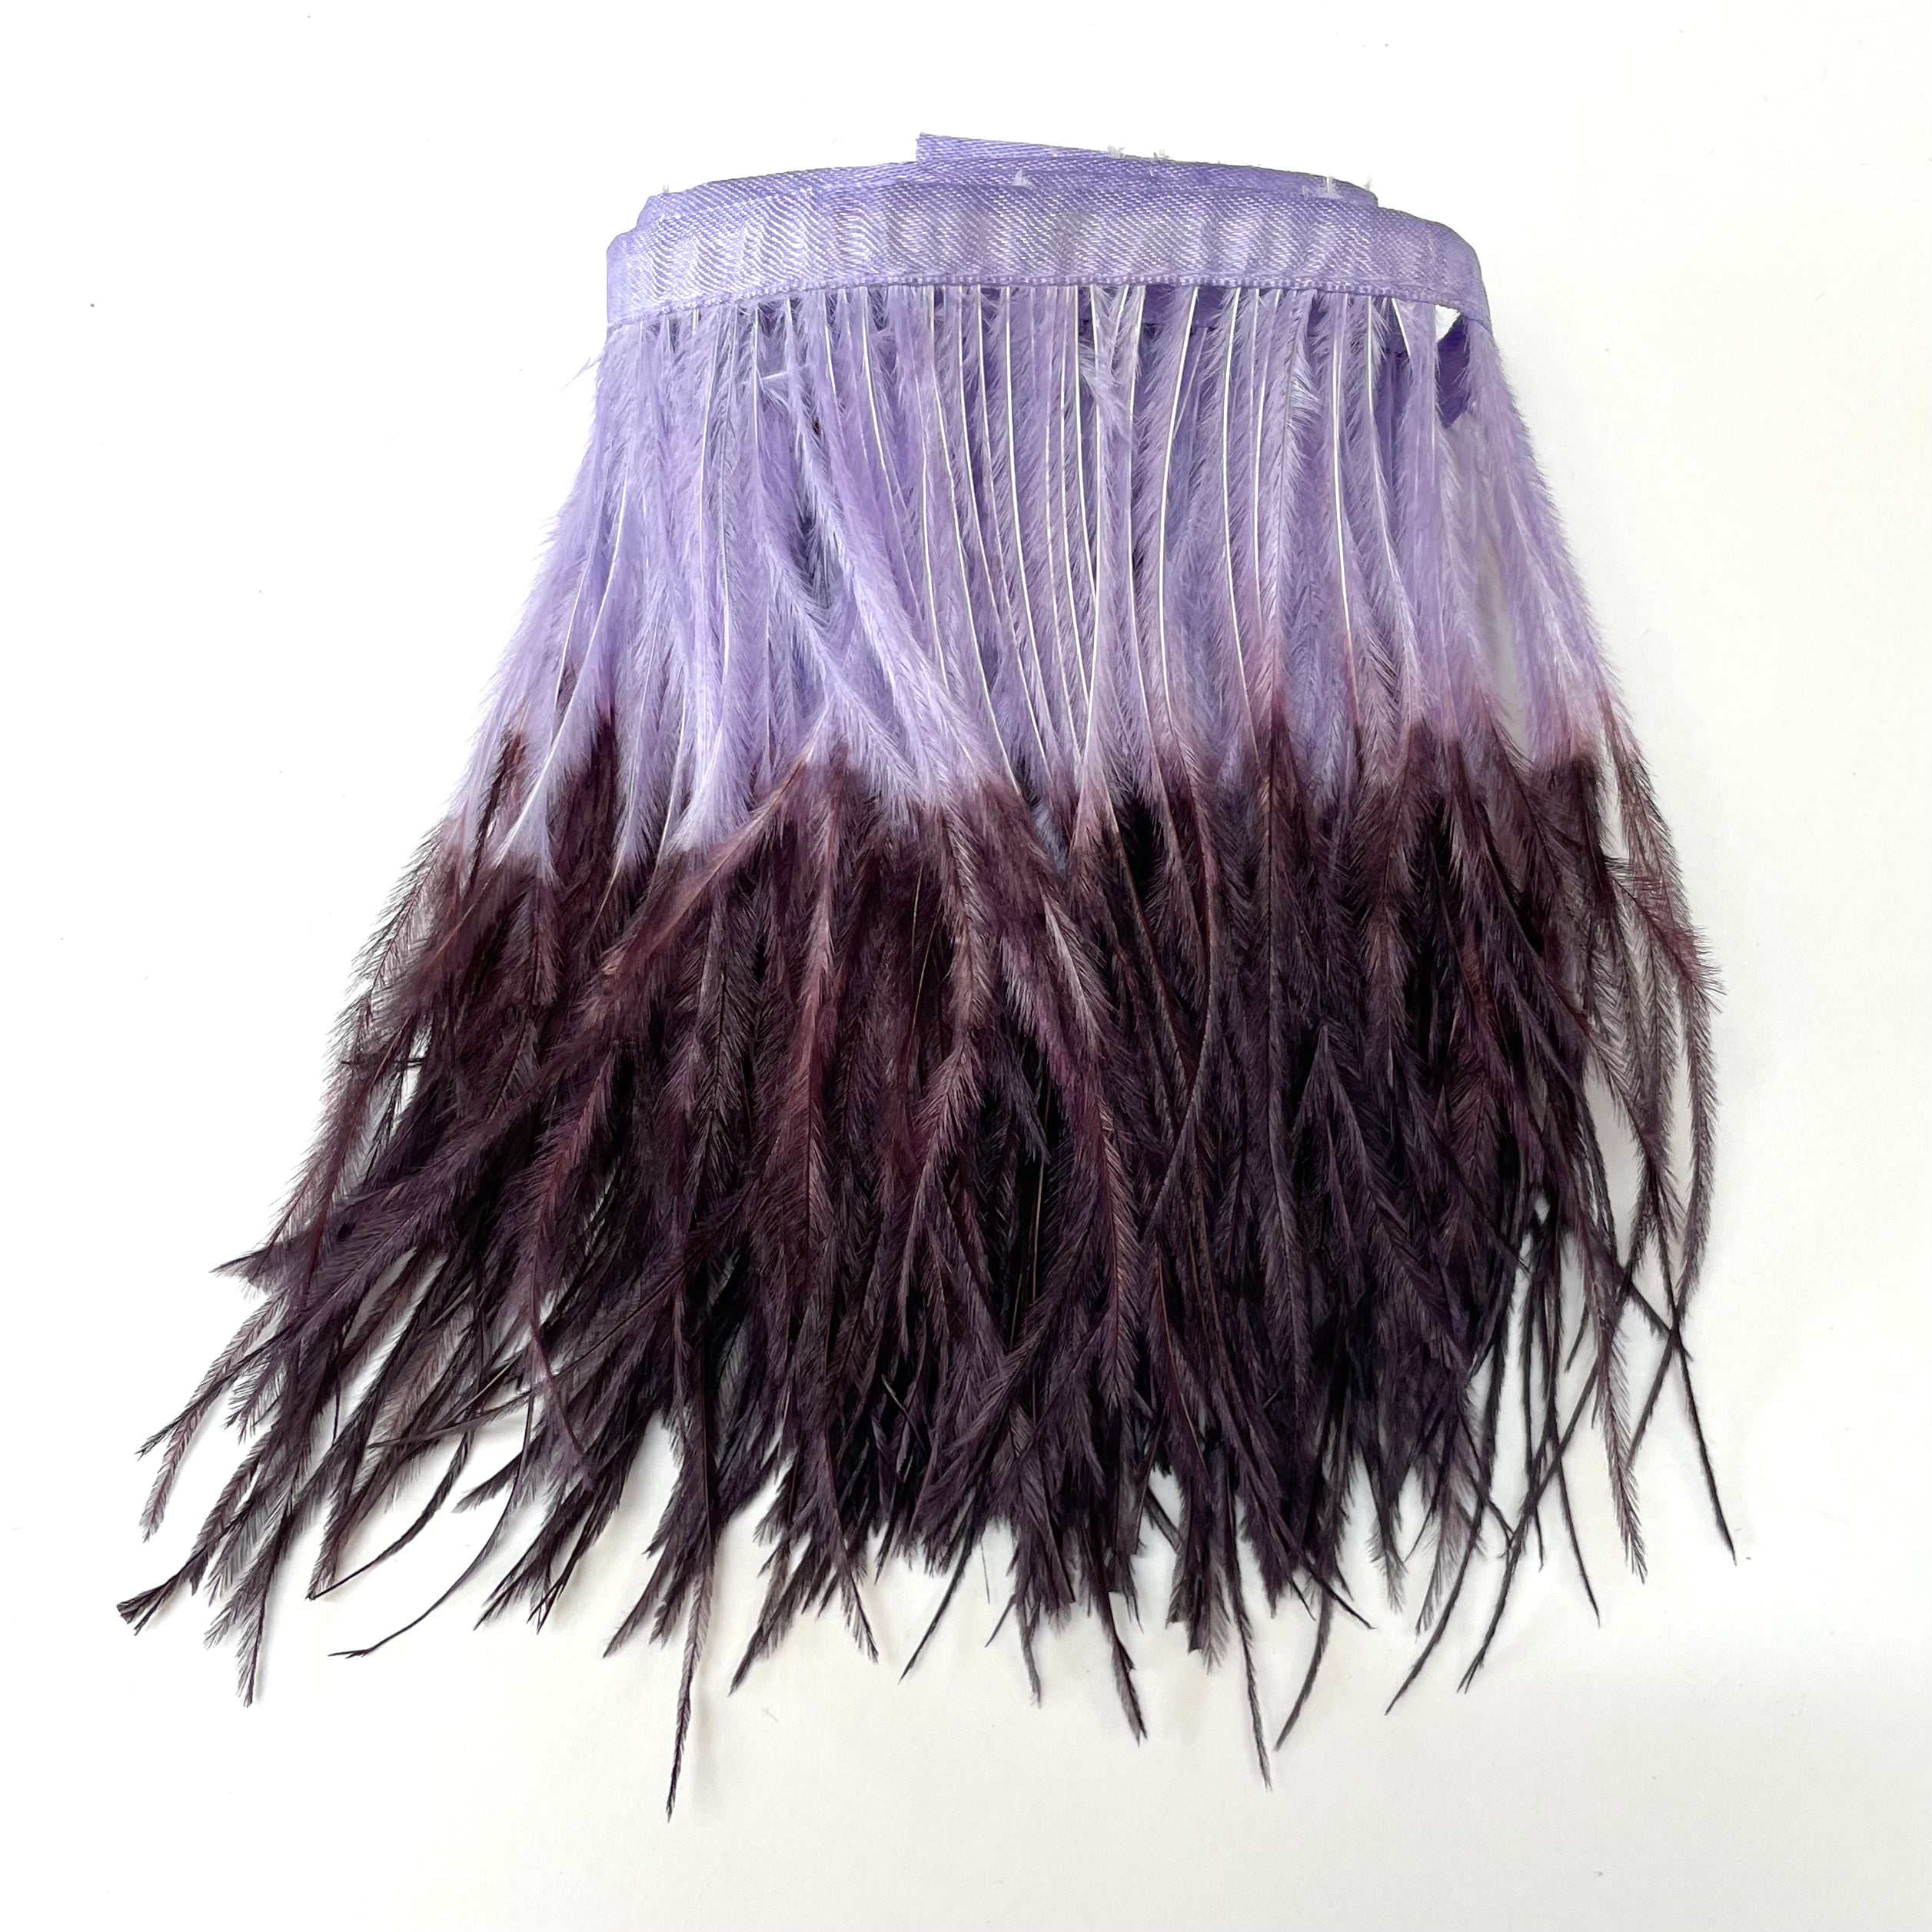 Ostrich Feathers Strung per metre - Two Tone Lilac / Eggplant